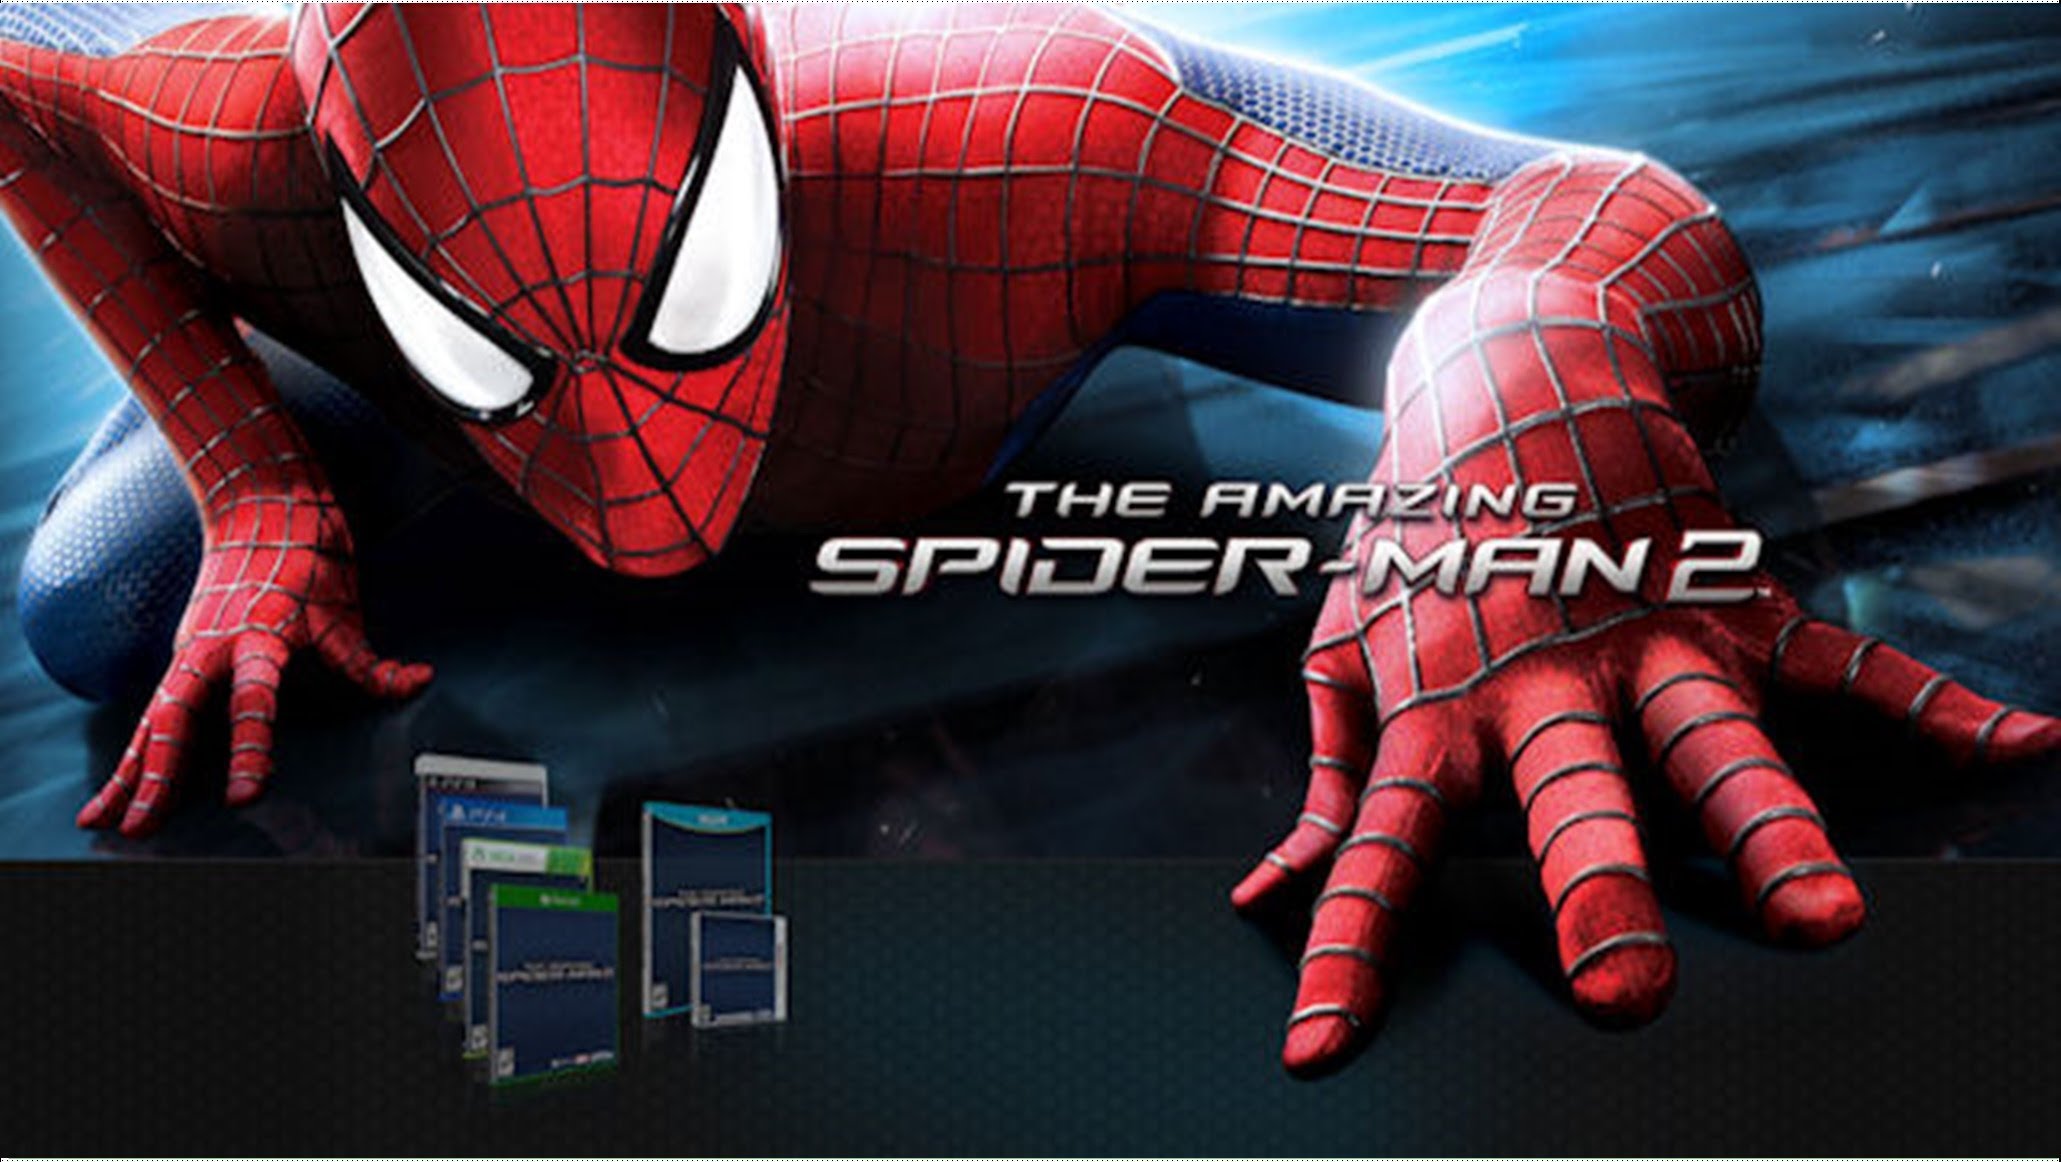 Wonderful Spider man Wallpapers High Definition Images